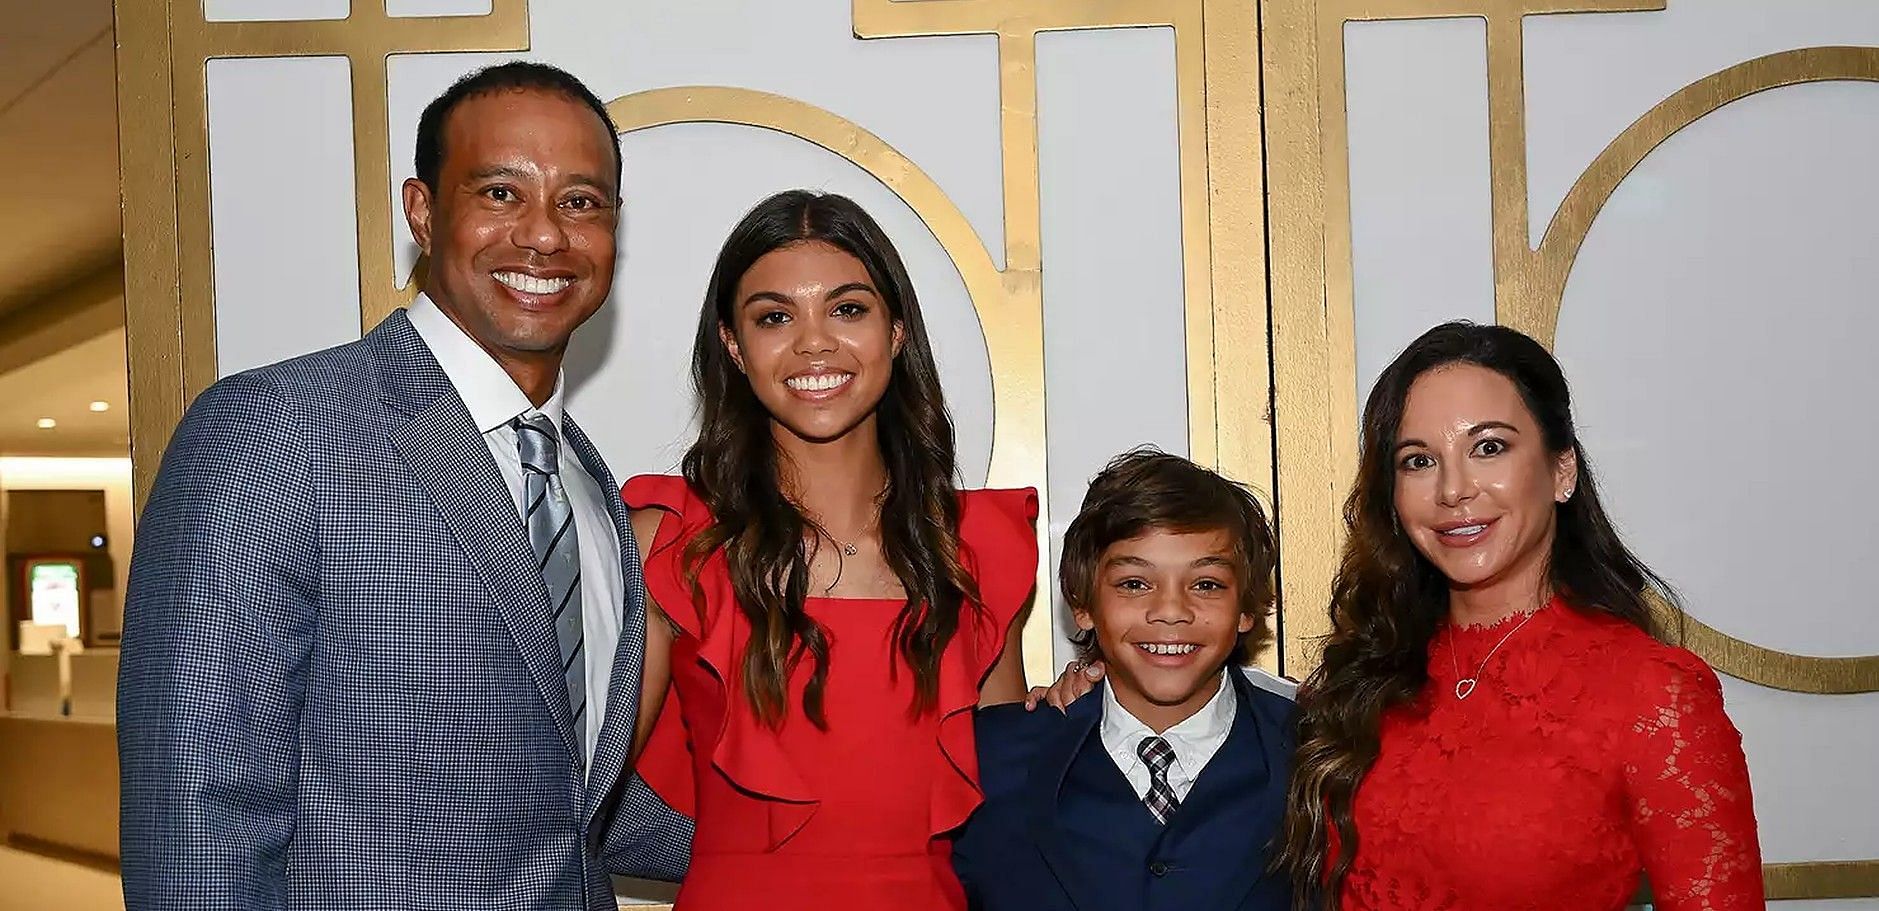 Tiger Woods with his family (Image via Getty)